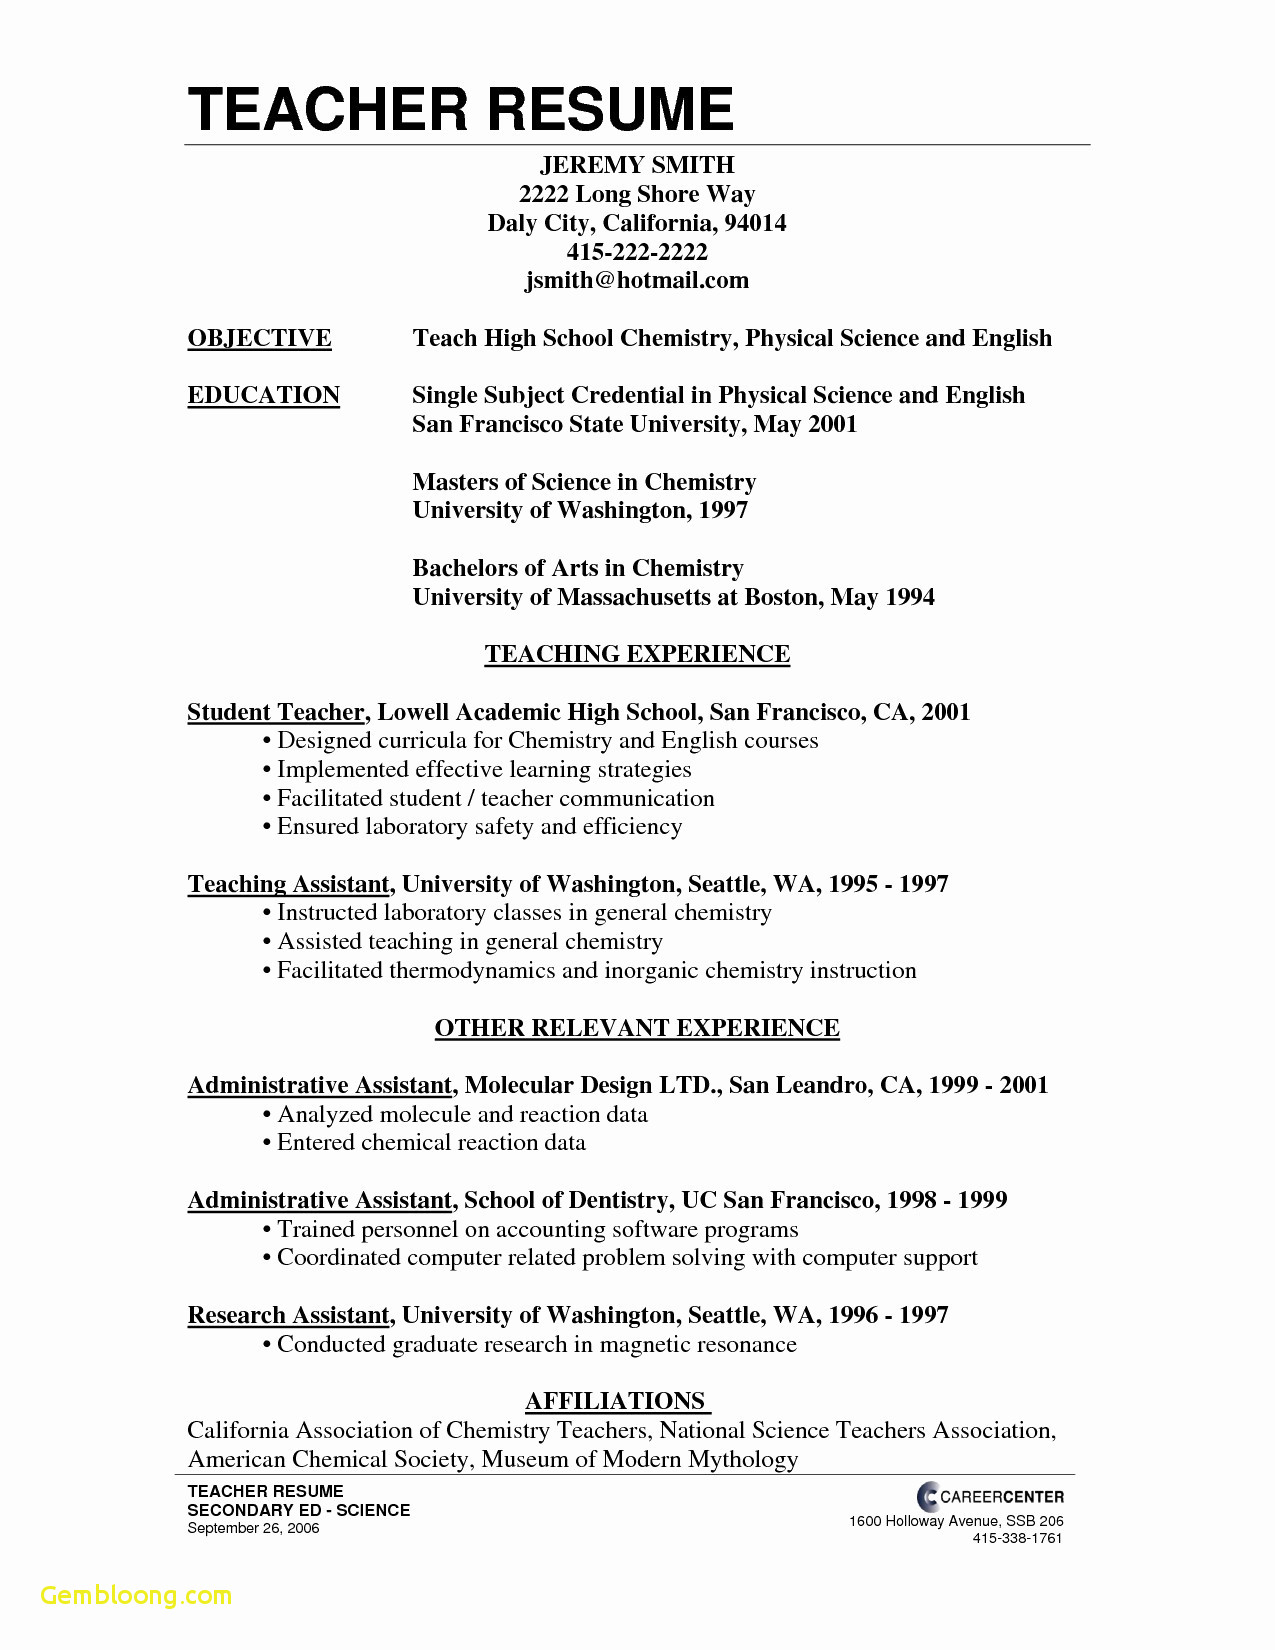 Letter to Troops Template - Military Experience Resume Examples Download Hr Resume Sample Luxury